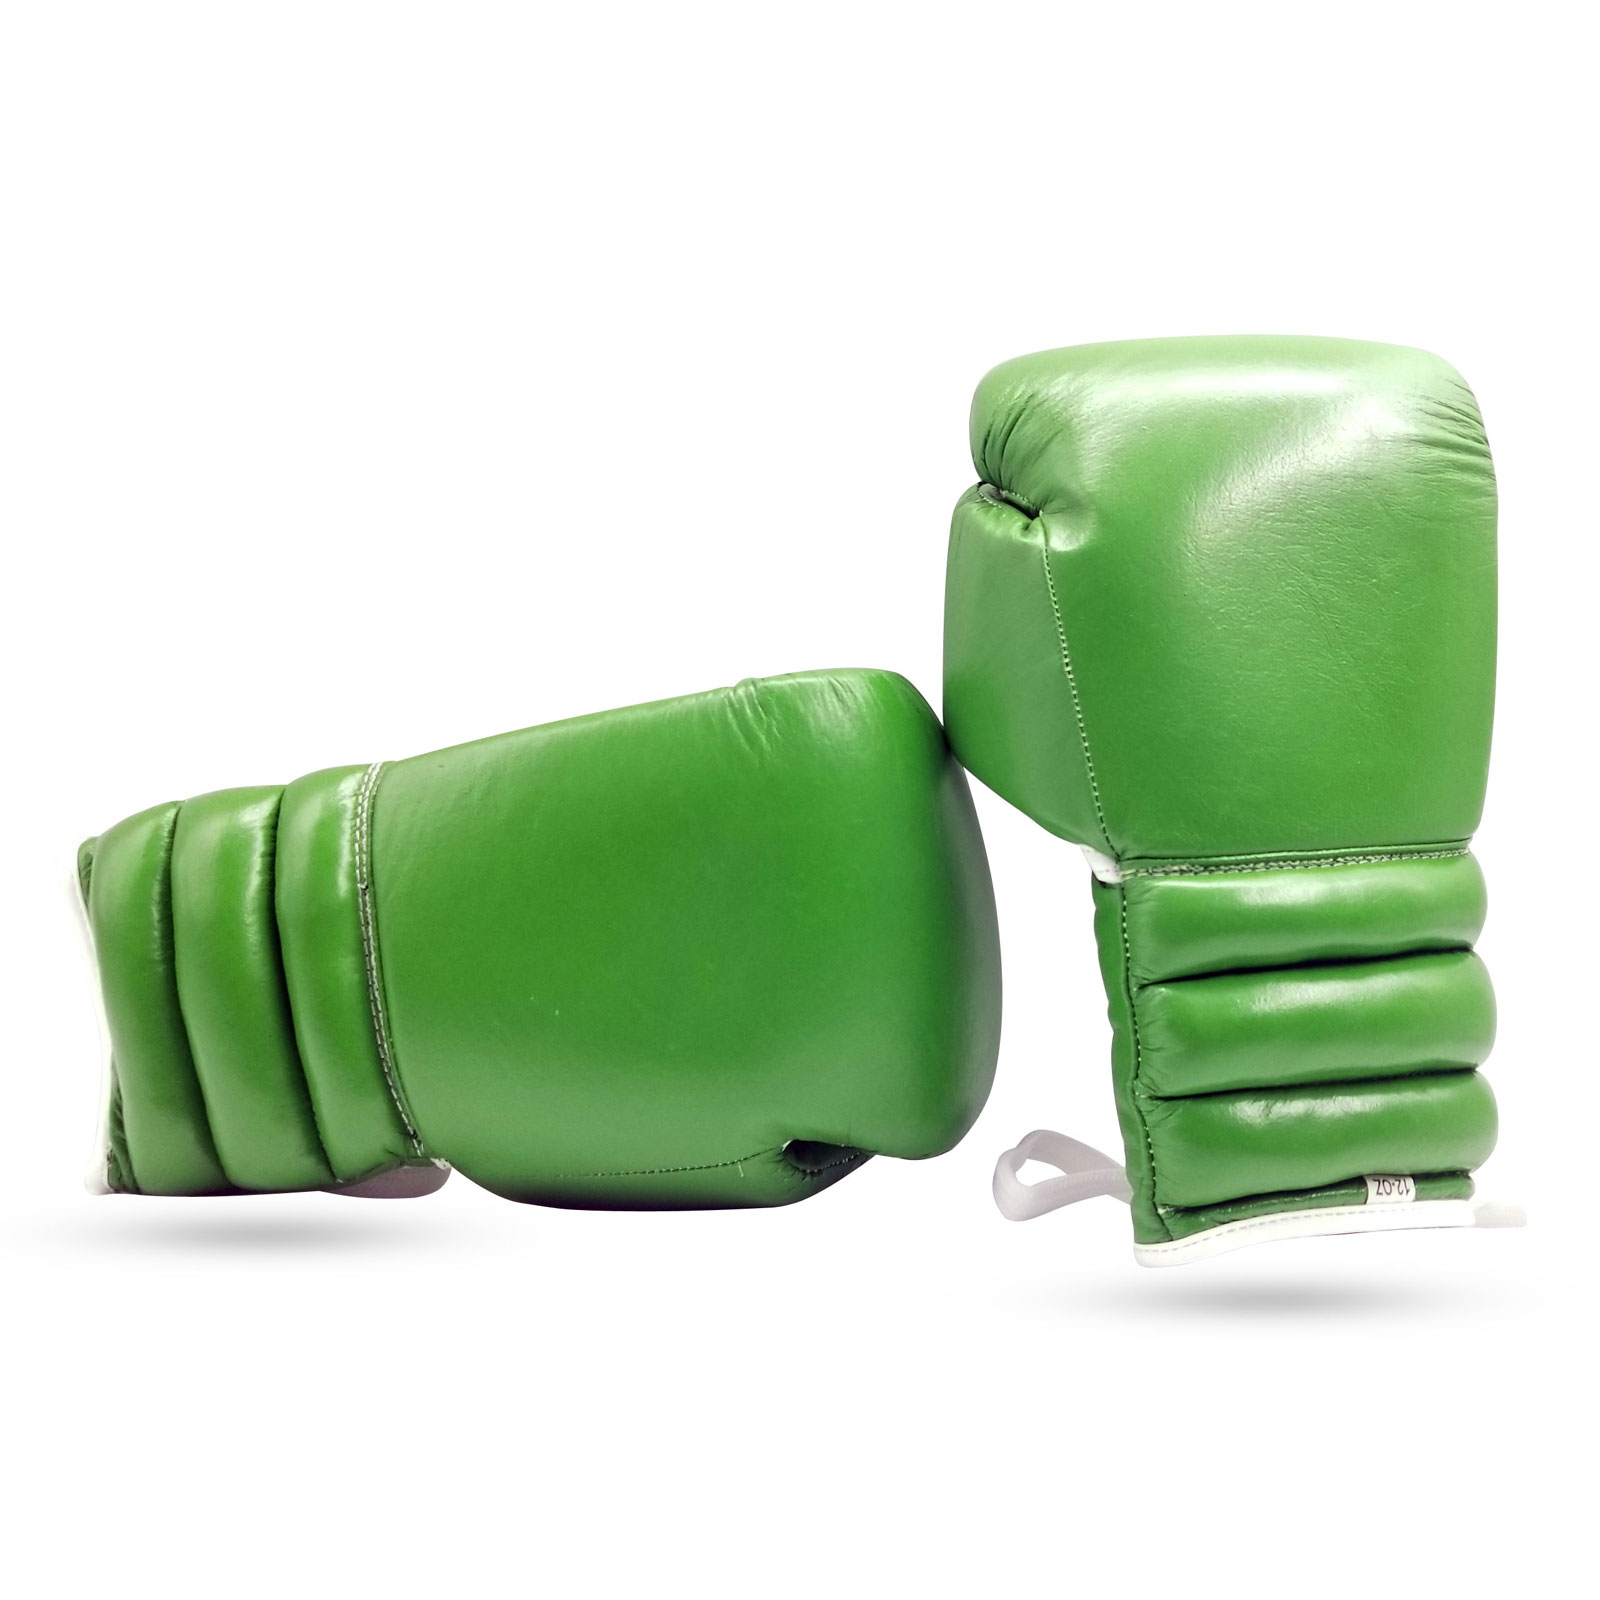 Durable Multi Layered Foam Padded Offers Unbeatable Price Kids and Adult Sizes Woldorf USA Boxing Gloves Kickboxing Muay Thai Punching Bag Vinyl Green 